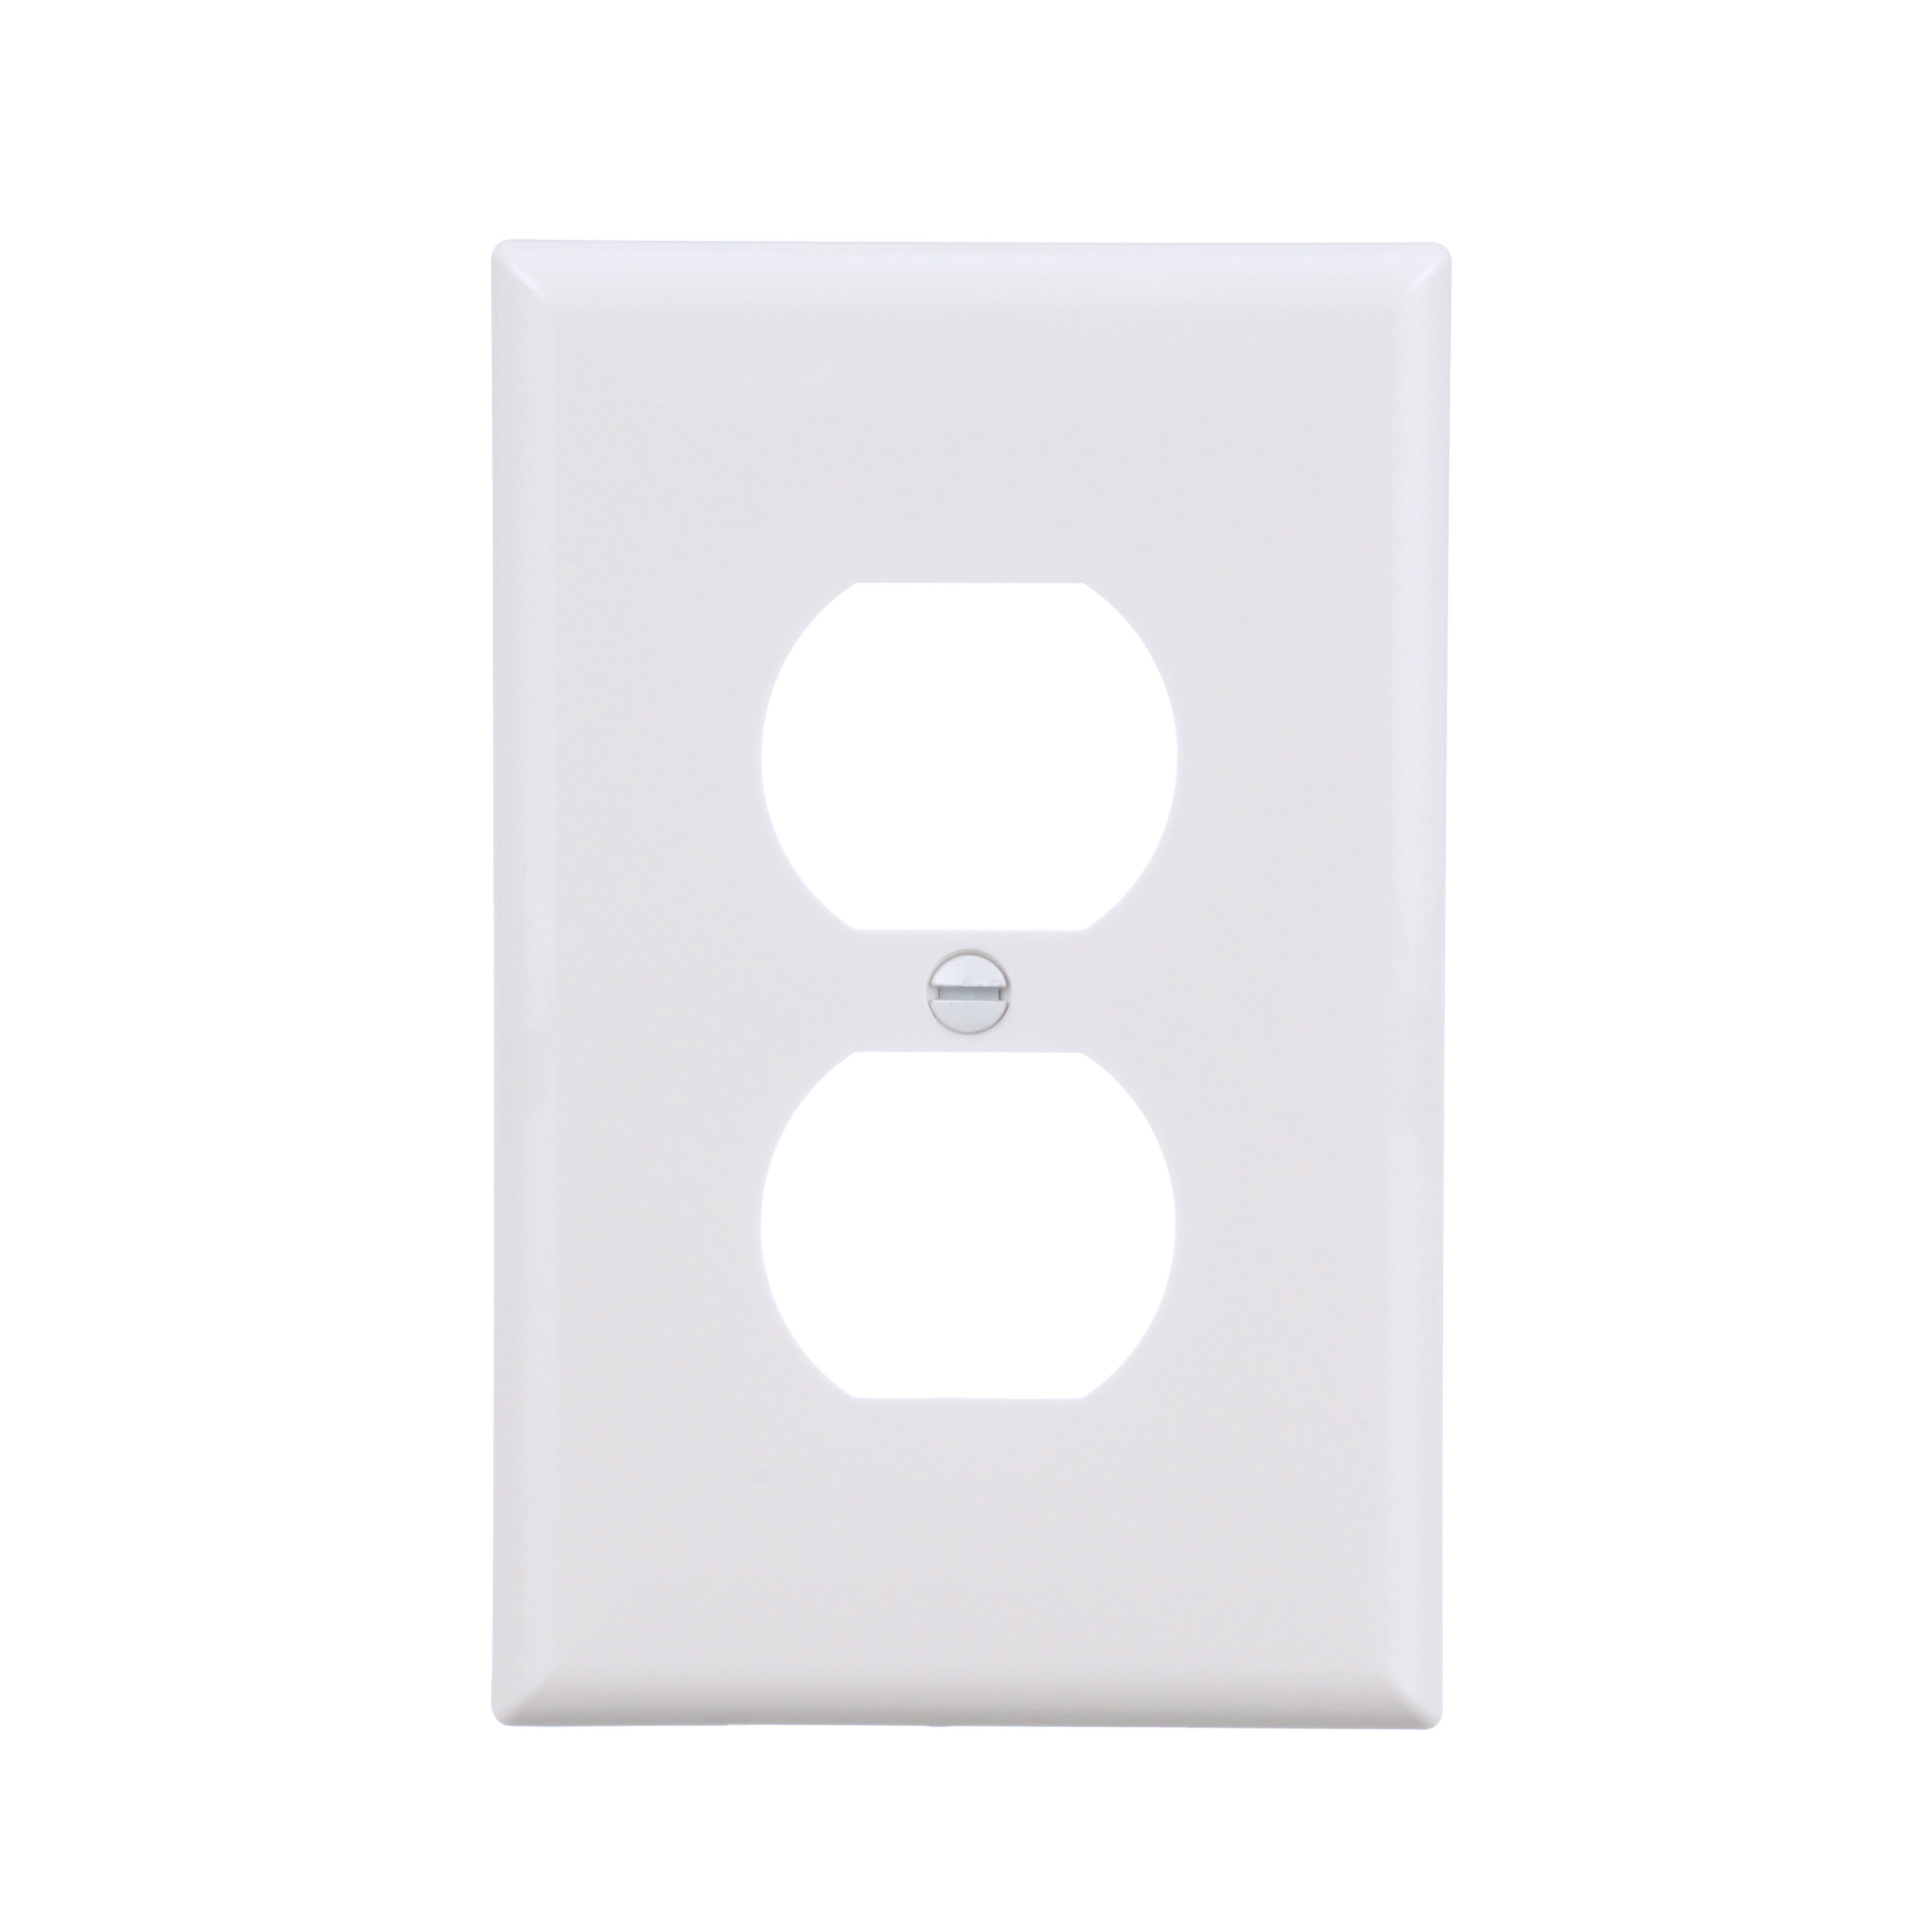 HUBBELL SS82 STAINLESS STEEL 2 GANG WALLPLATE RECEPTACLE DUPLEX COVER LOT OF 5 